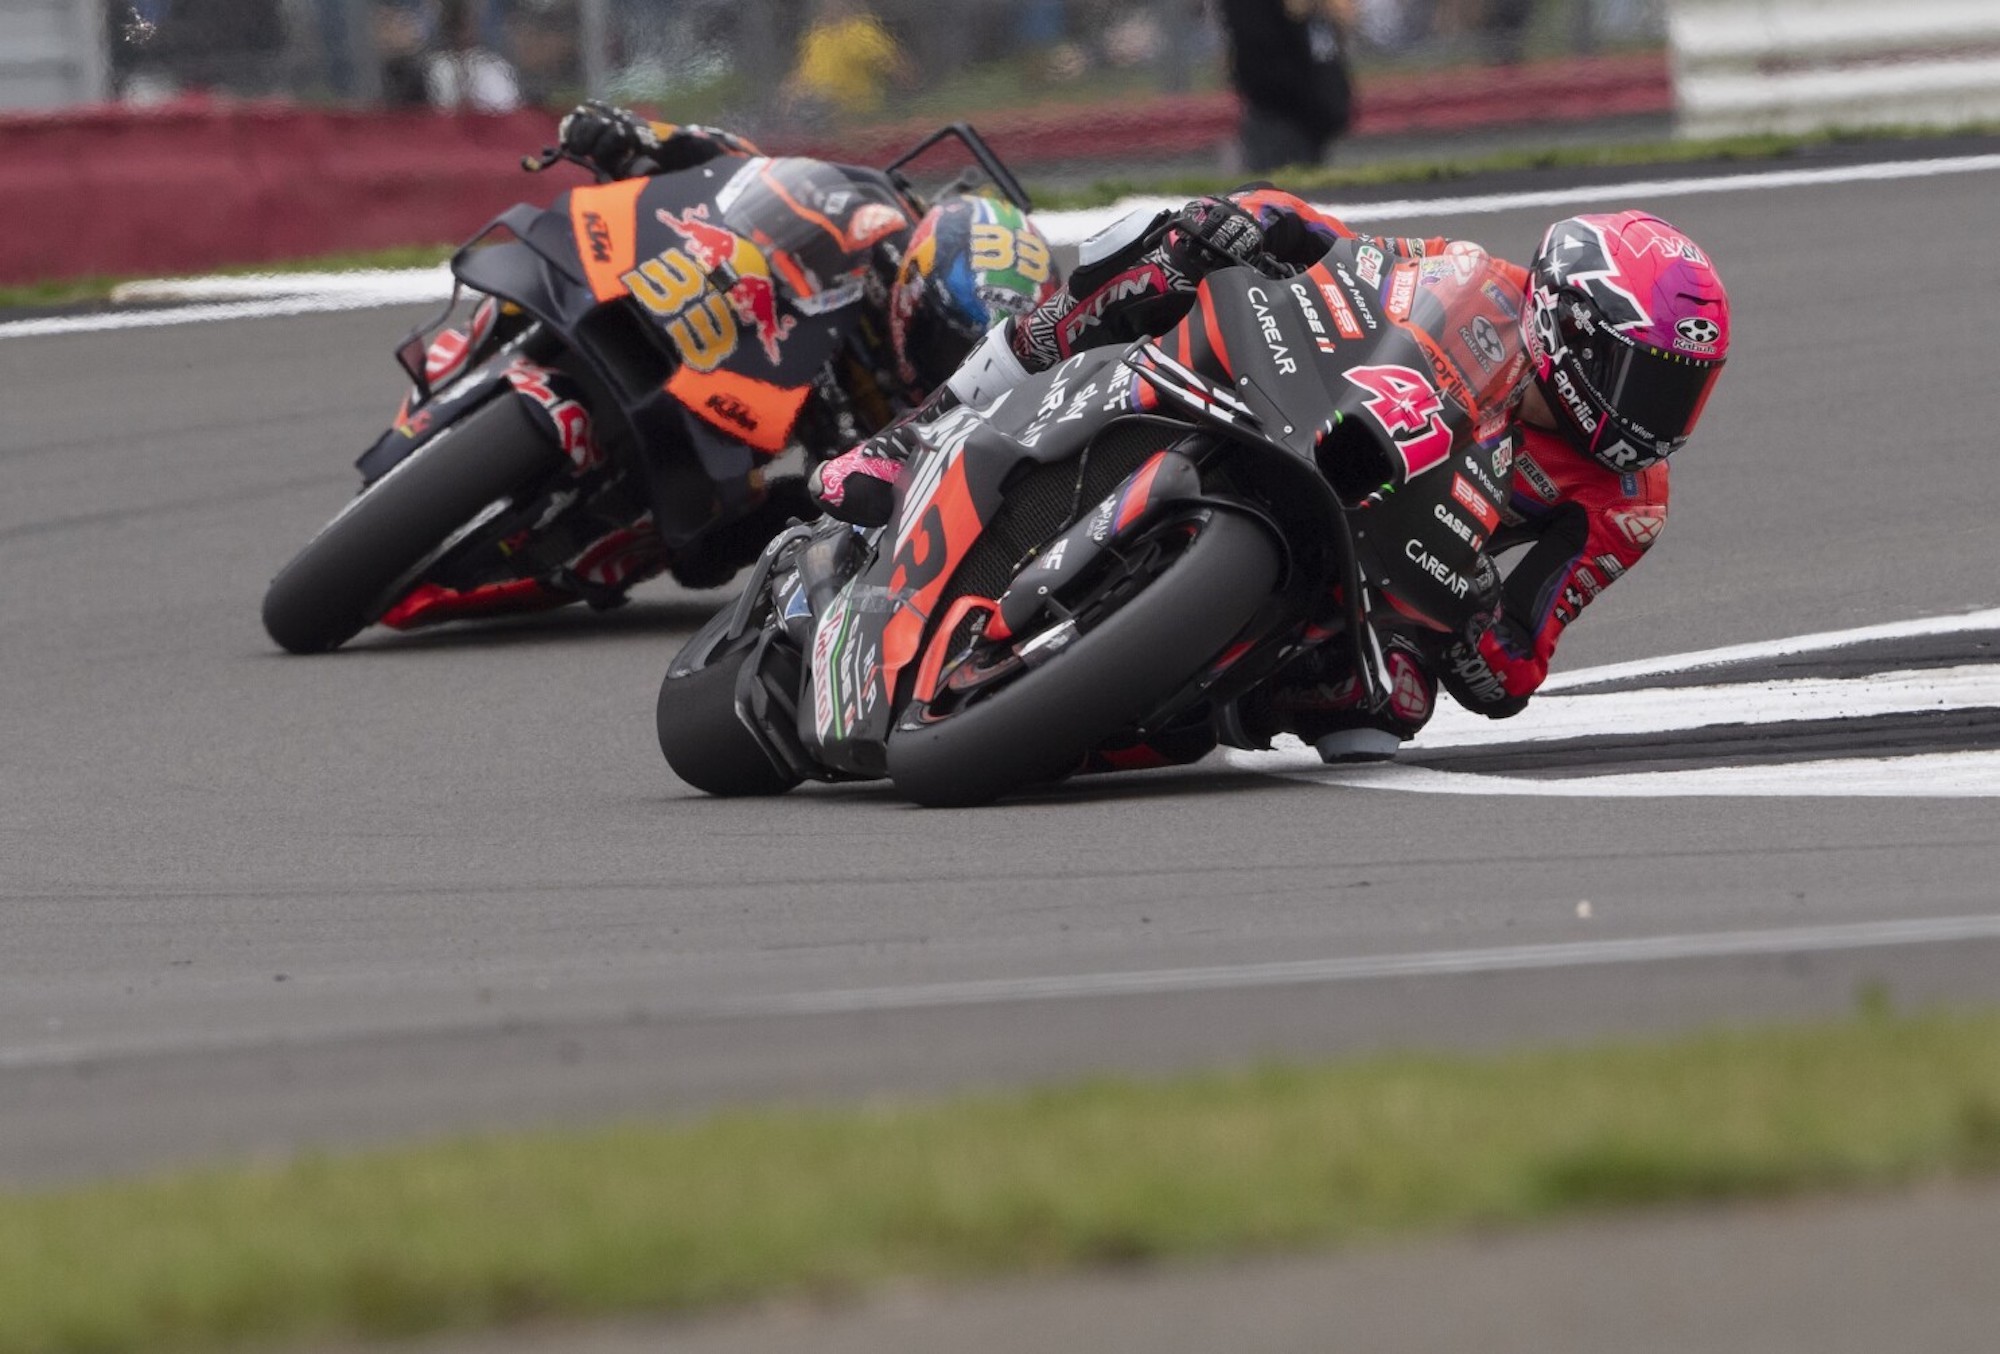 Aleix Espargaró, Aprilia’s #1 and the winner of our good British Grand Prix. Media sourced from NBC Sports.